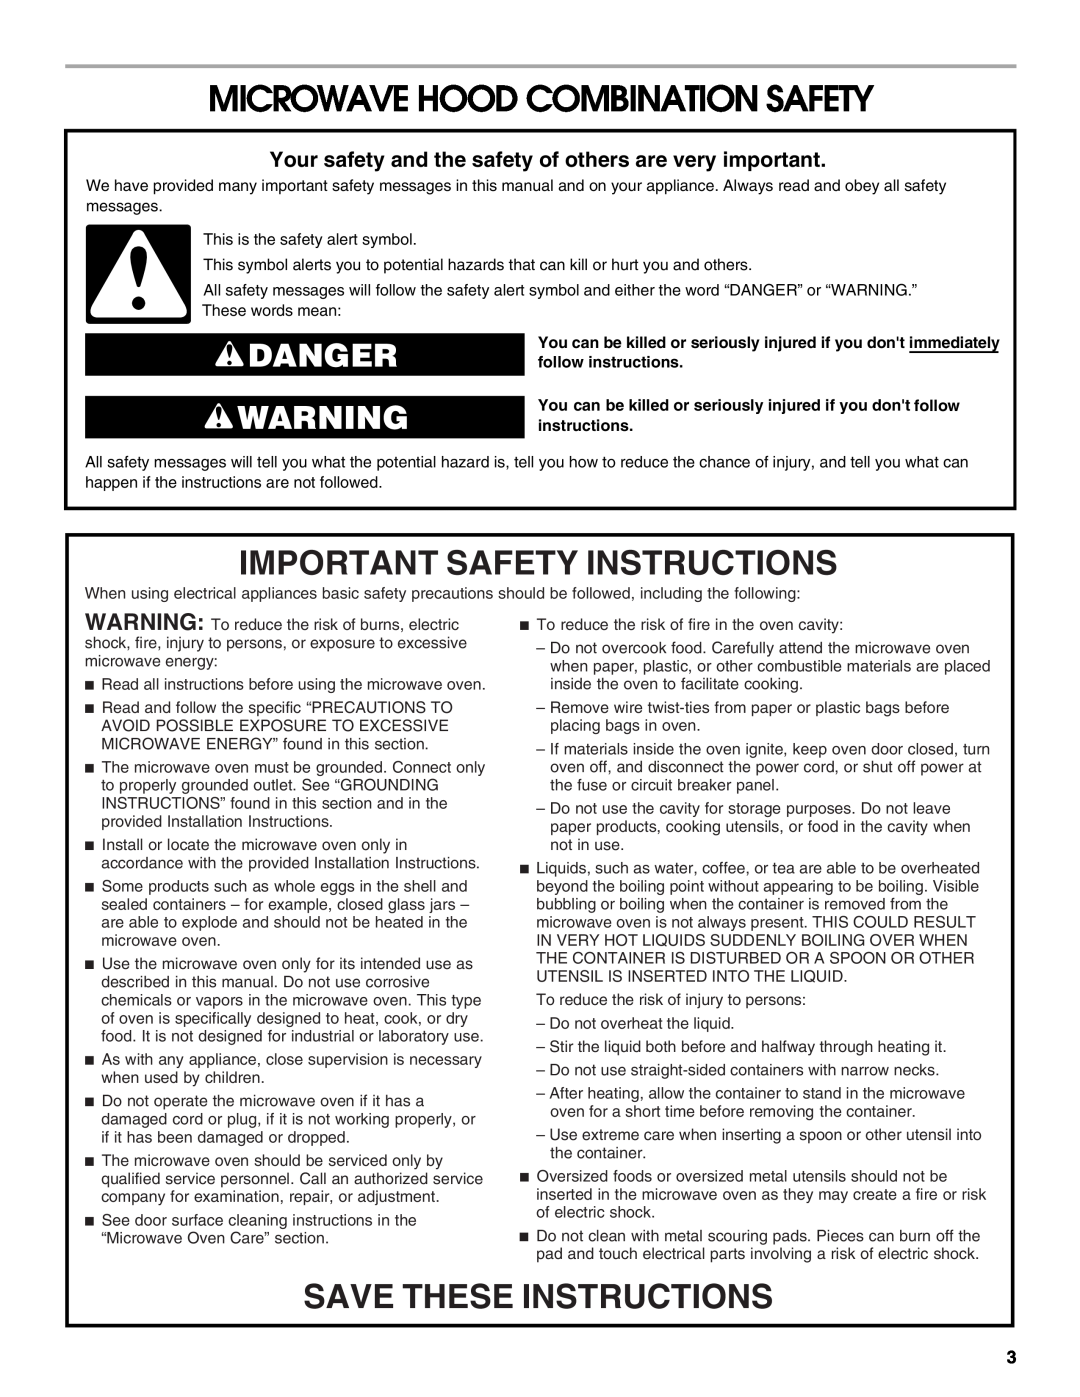 Whirlpool IMH16XS manual Microwave Hood Combination Safety, Important Safety Instructions, Save These Instructions, Danger 